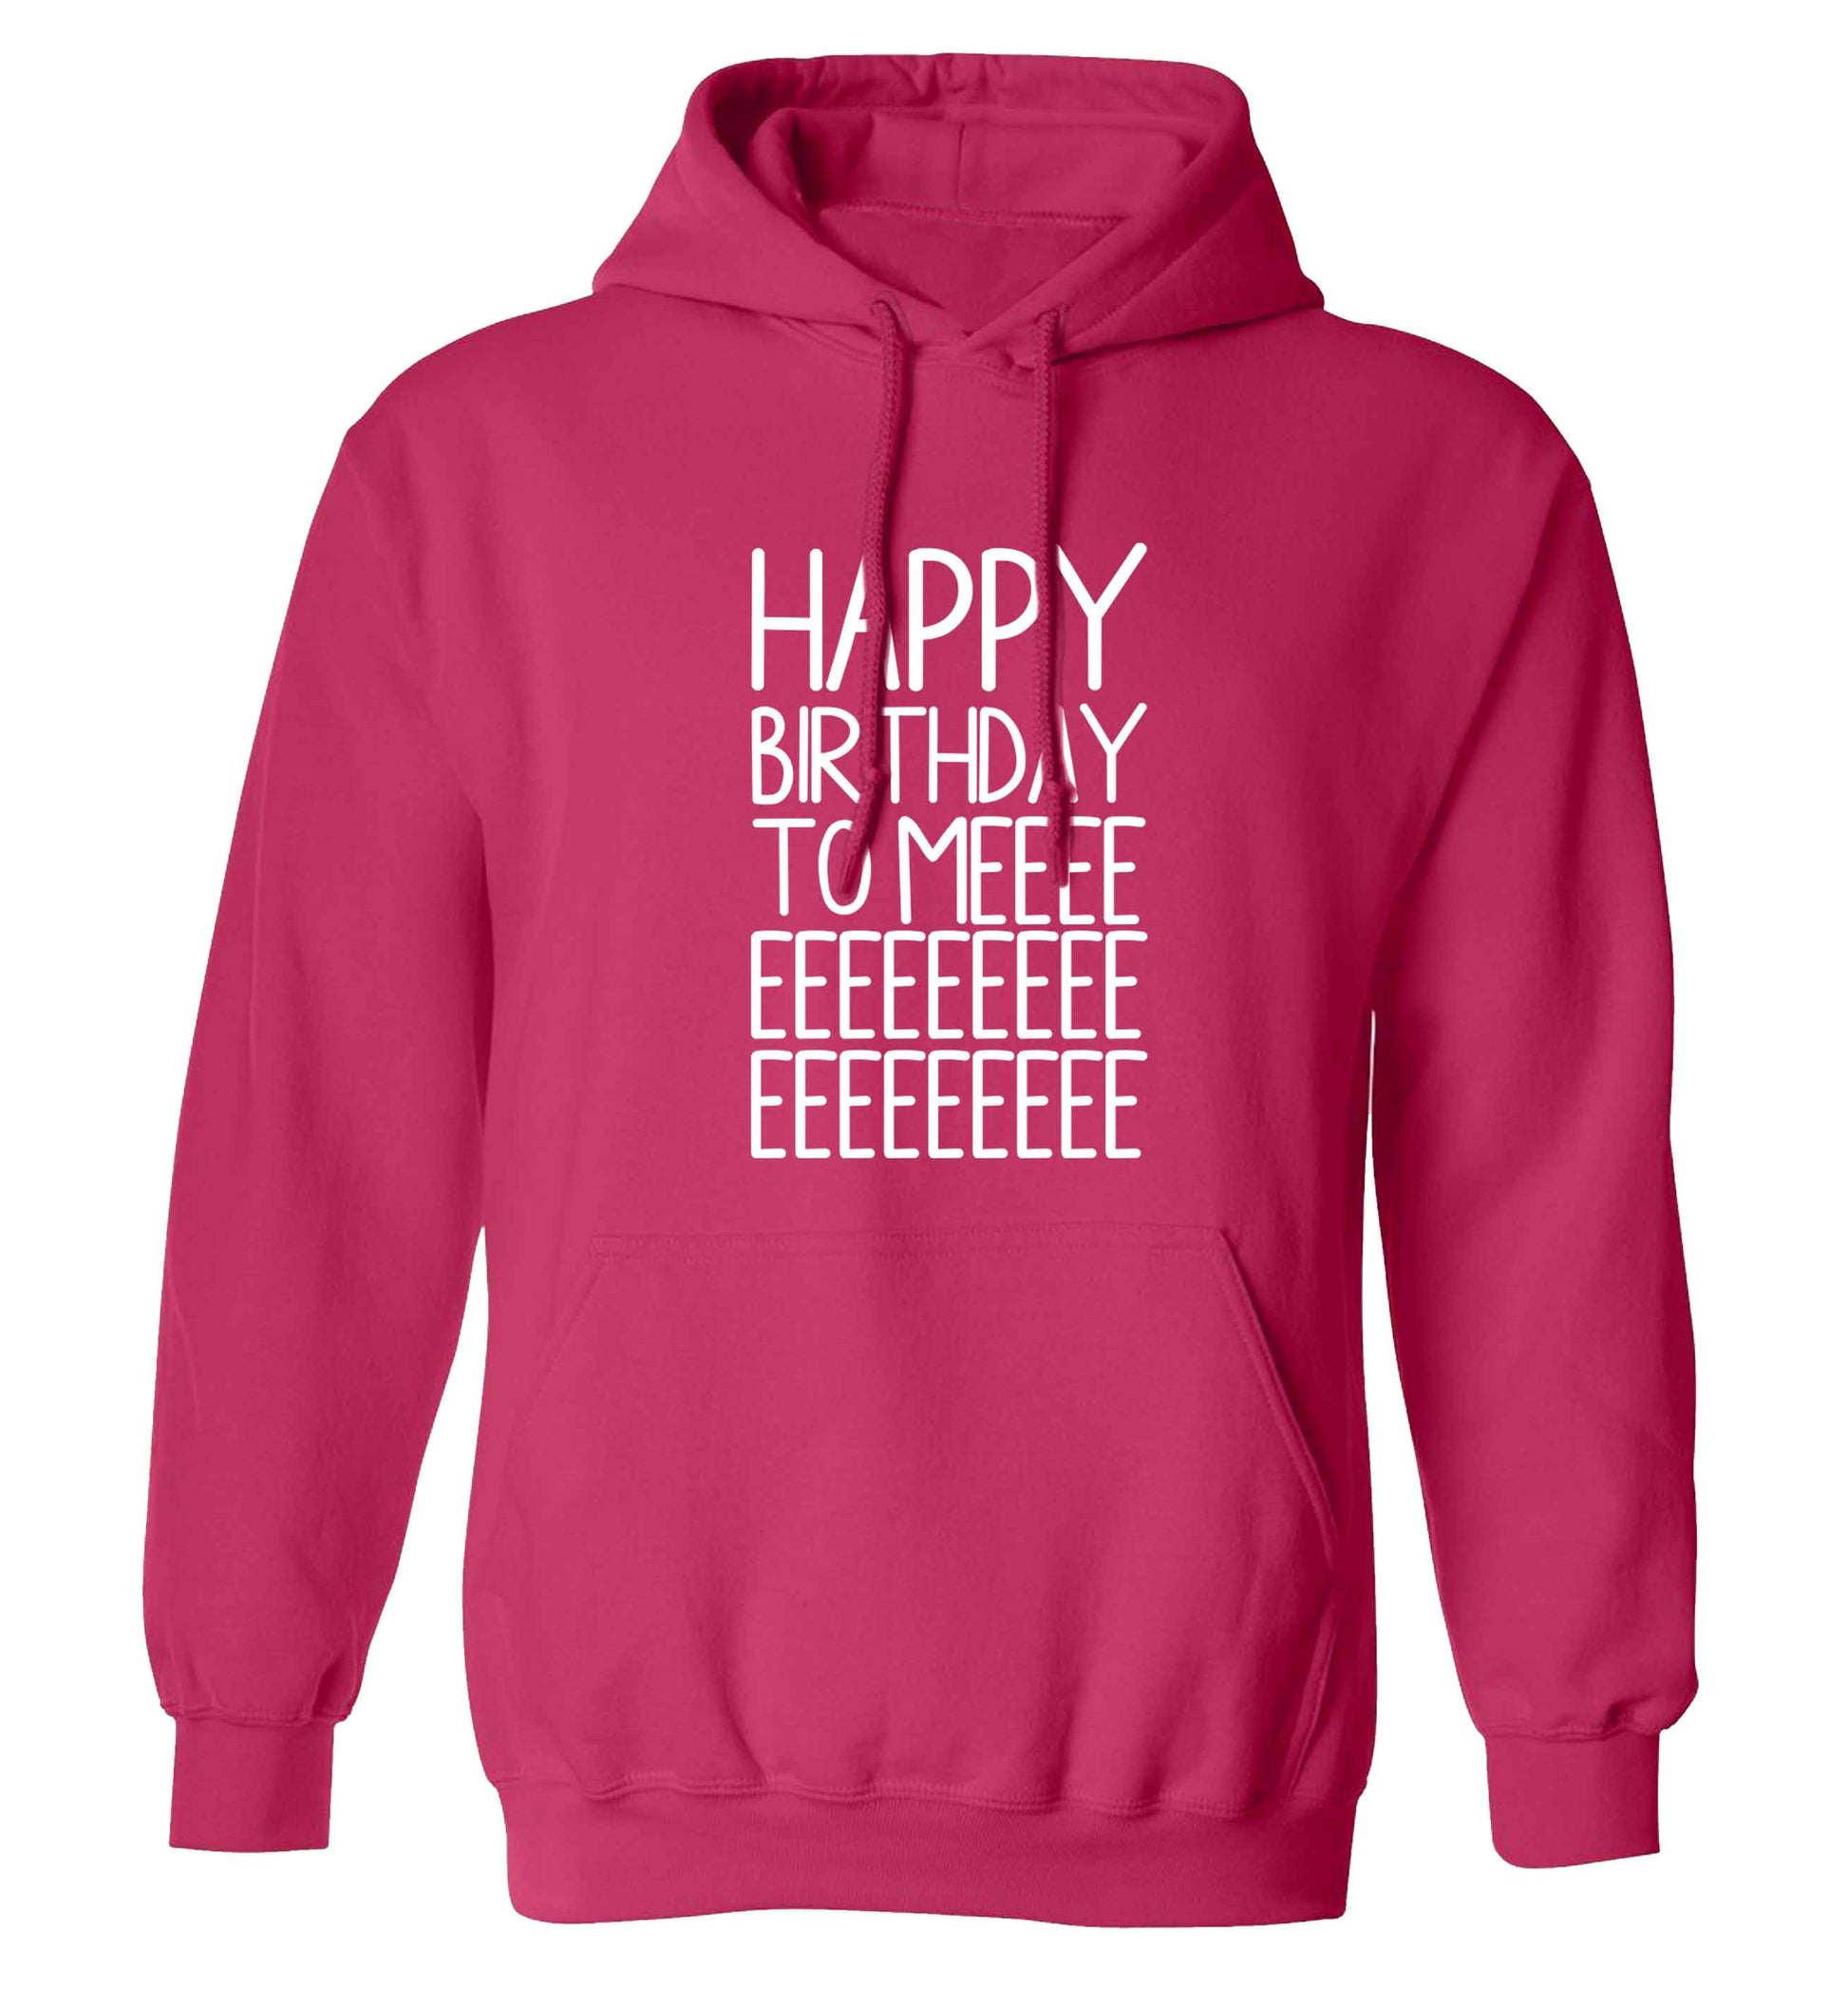 Happy birthday to me adults unisex pink hoodie 2XL